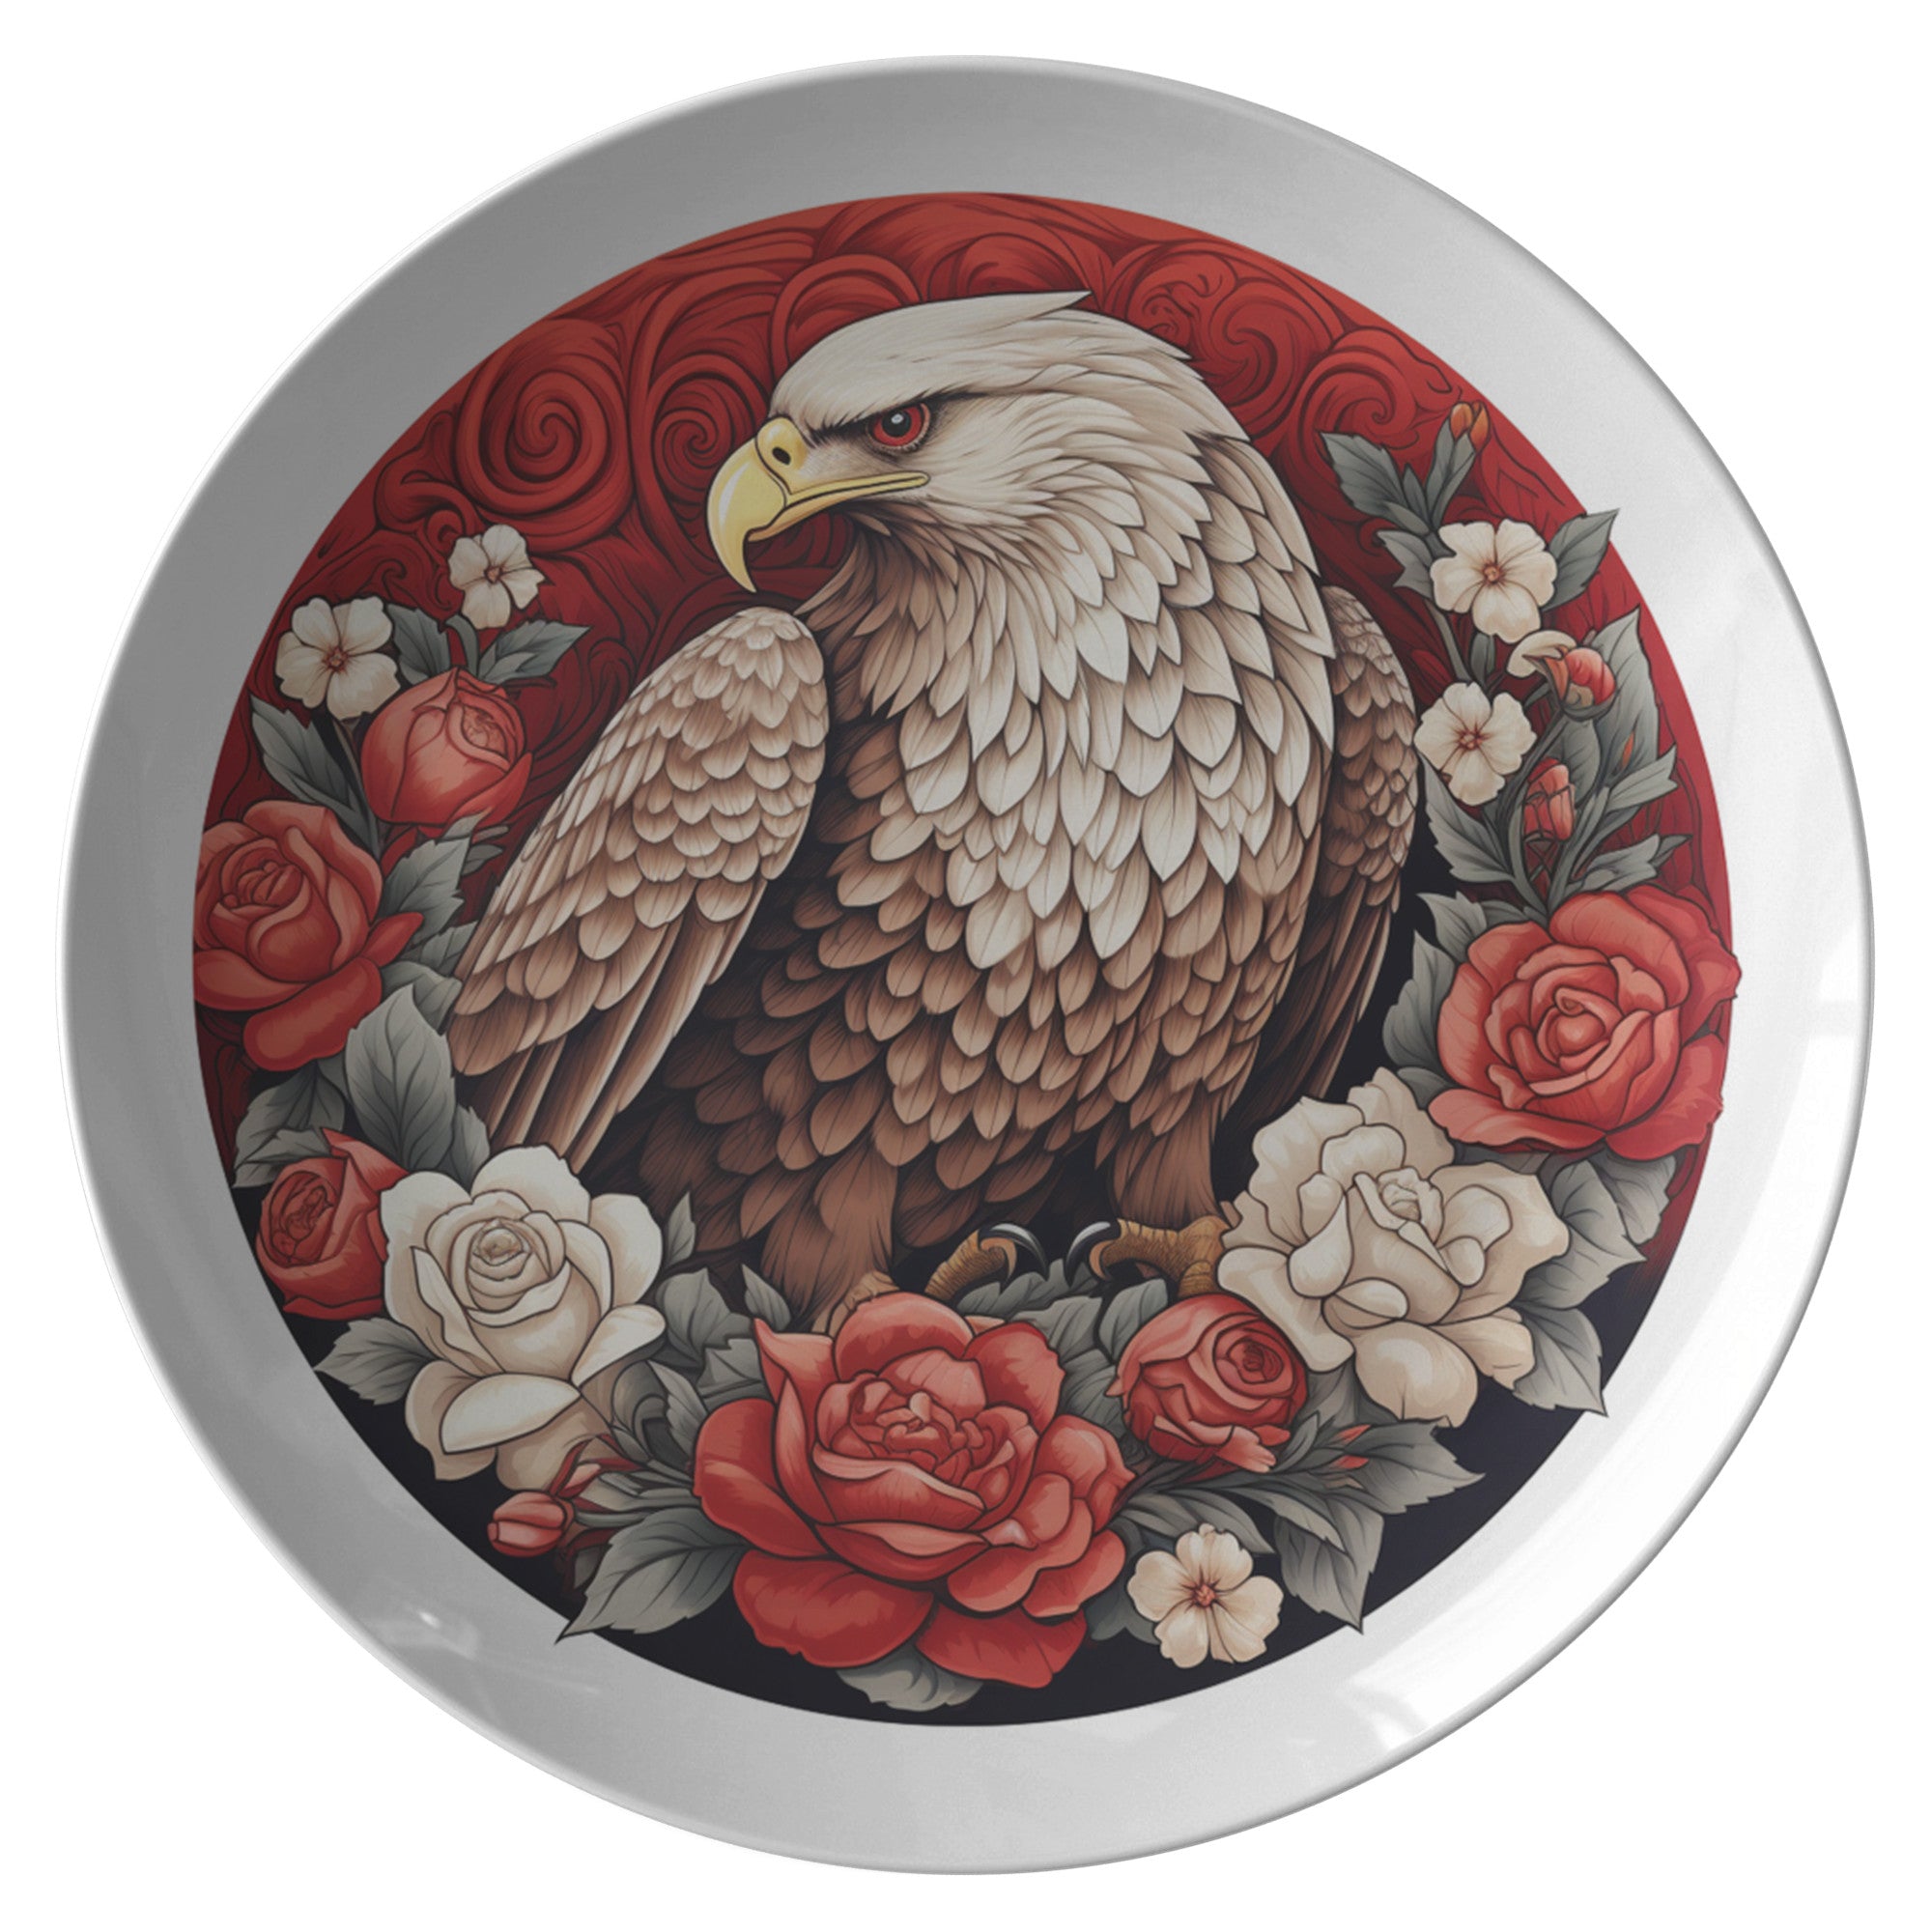 Eagle With Red & White Roses Plate Kitchenware teelaunch   